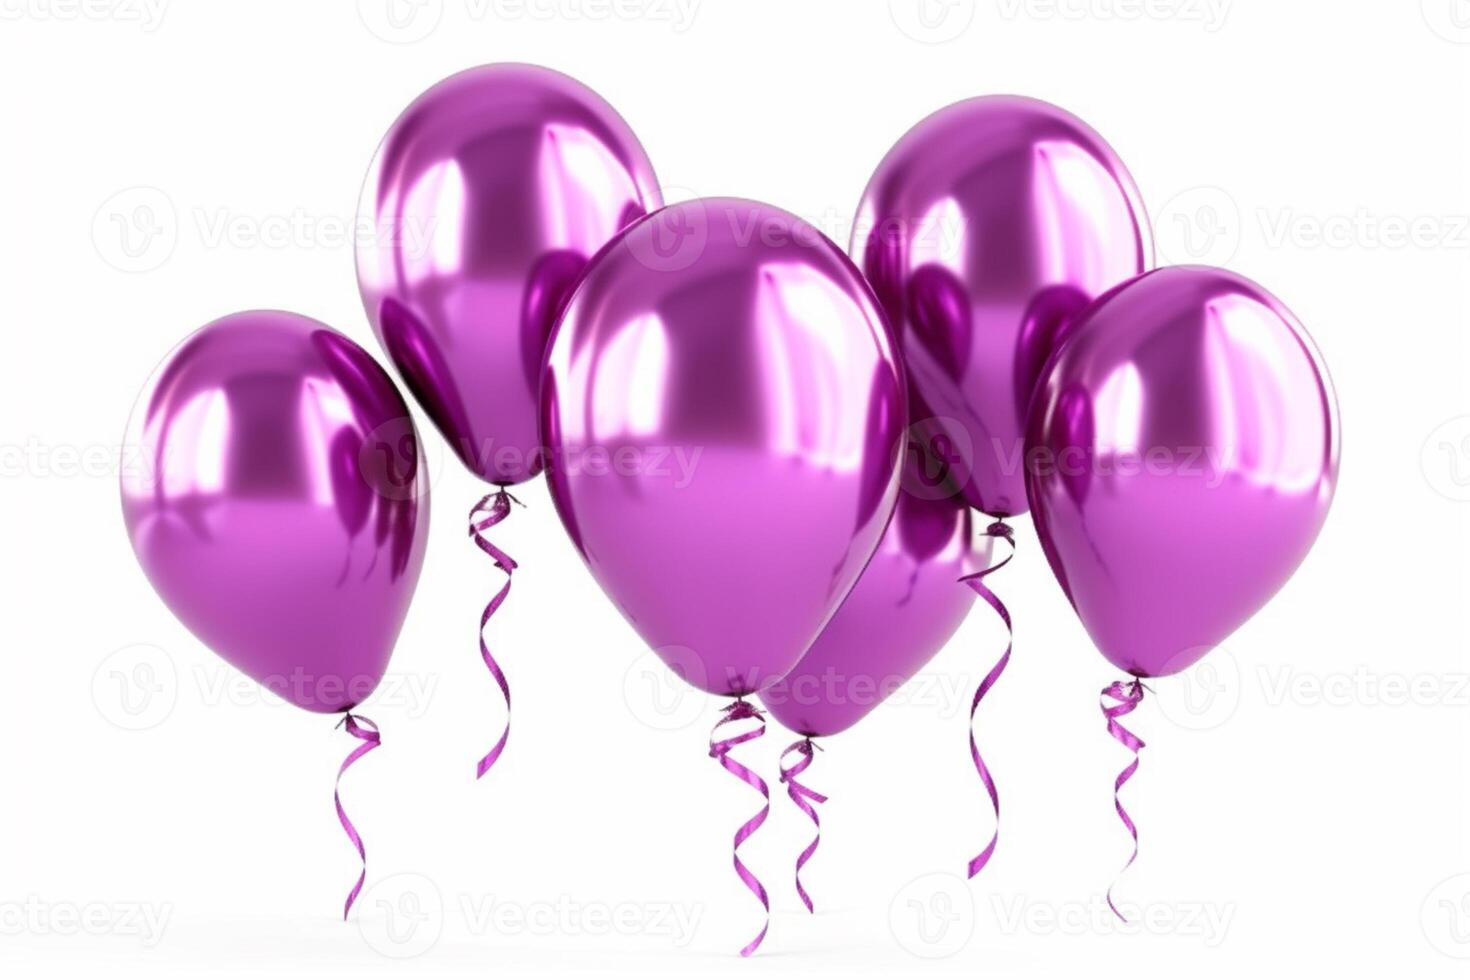 Set of purple inflatable foil balloons. Bright party decoration figures shiny isolated on white background. photo